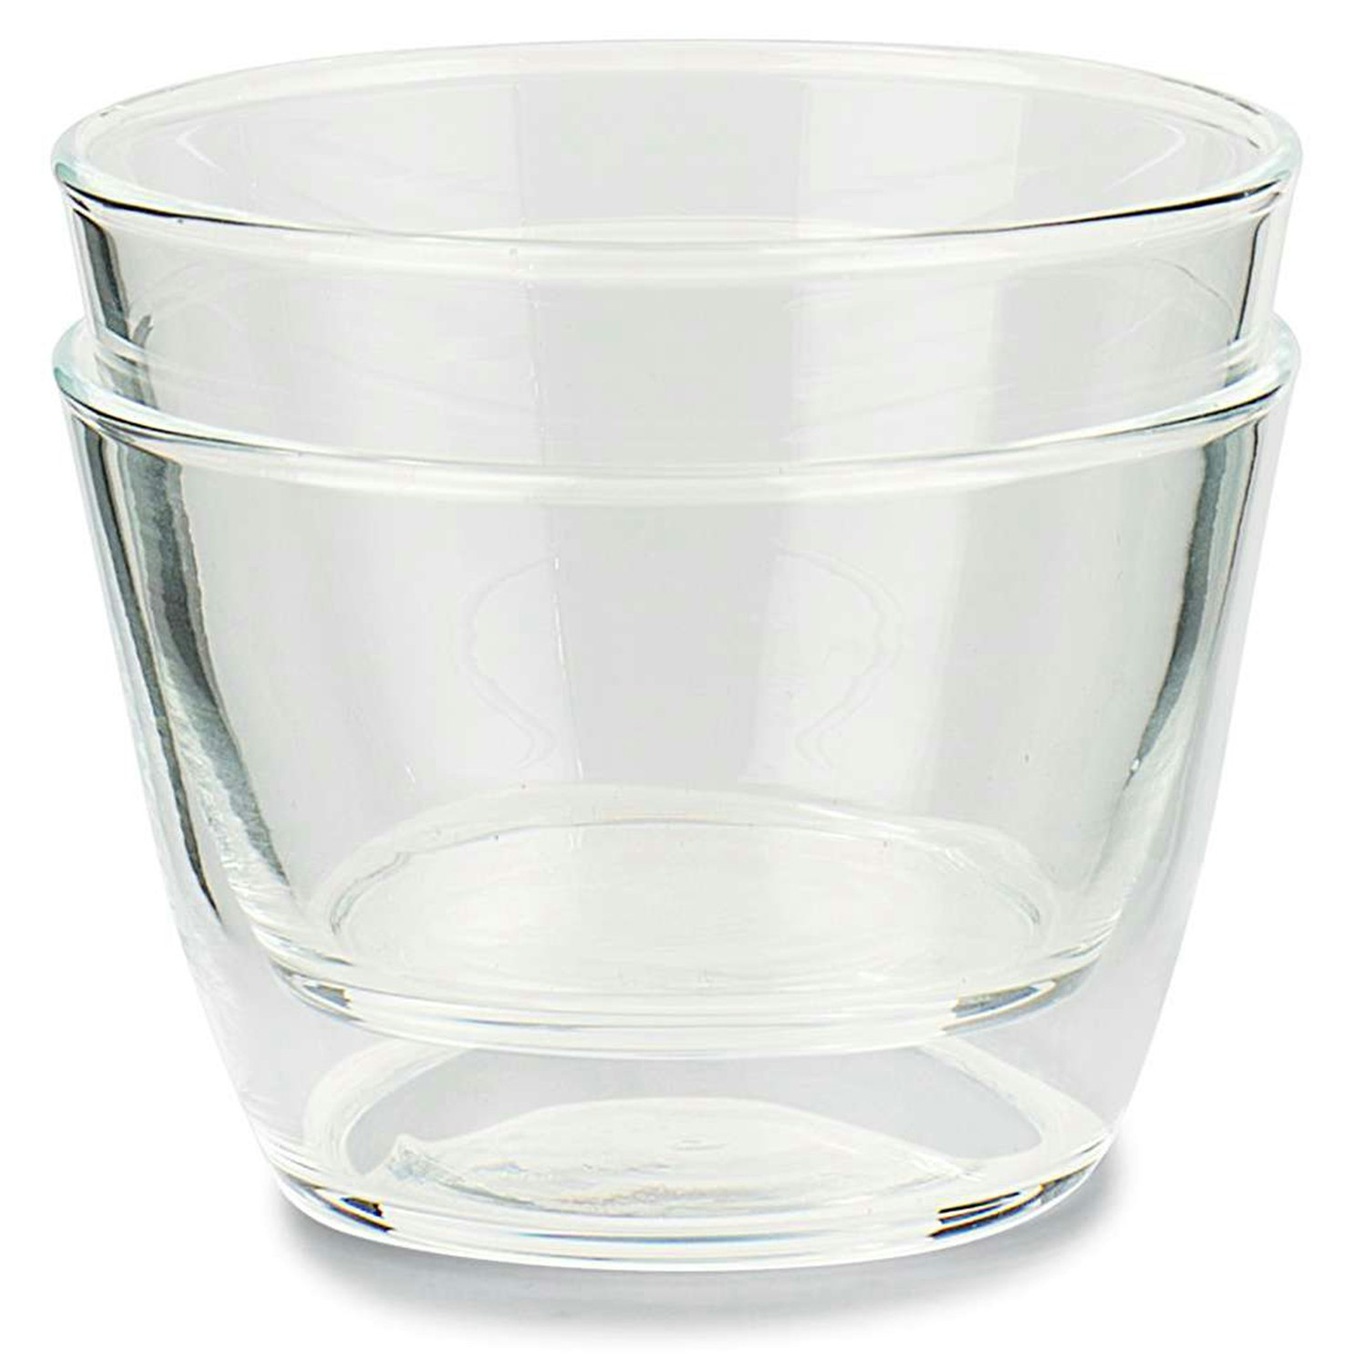 https://royaldesign.com/image/2/spring-copenhagen-double-up-drinking-glasses-clear-2-pack-0?w=800&quality=80